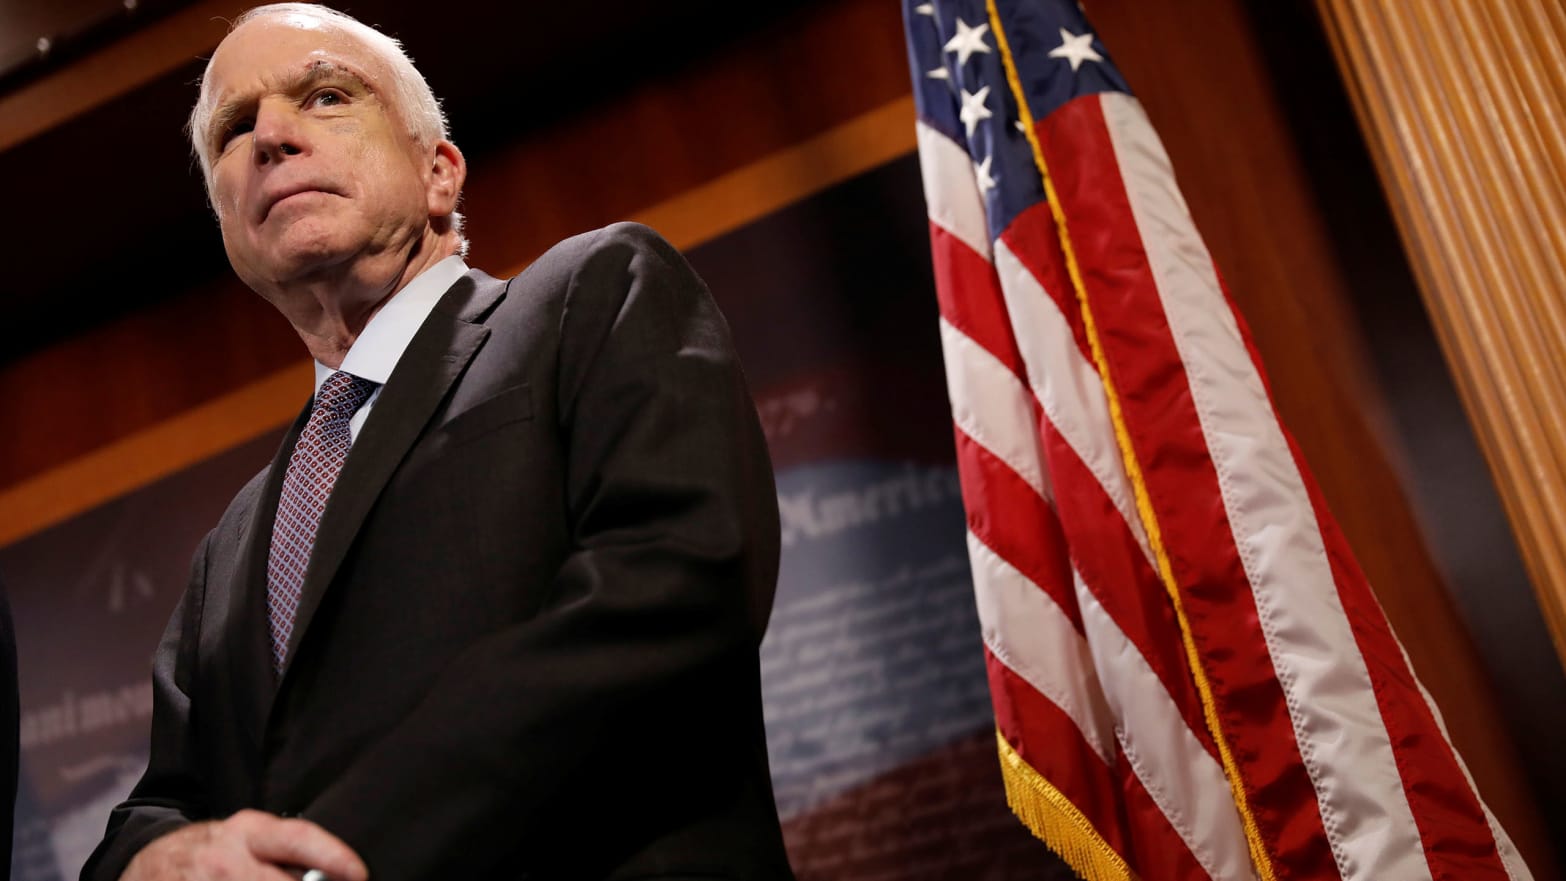 Senator John McCain (R-AZ) looks on during a press conference about his resistance to the so-called "Skinny Repeal" of the Affordable Care Act on Capitol Hill in Washington, U.S., July 27, 2017.